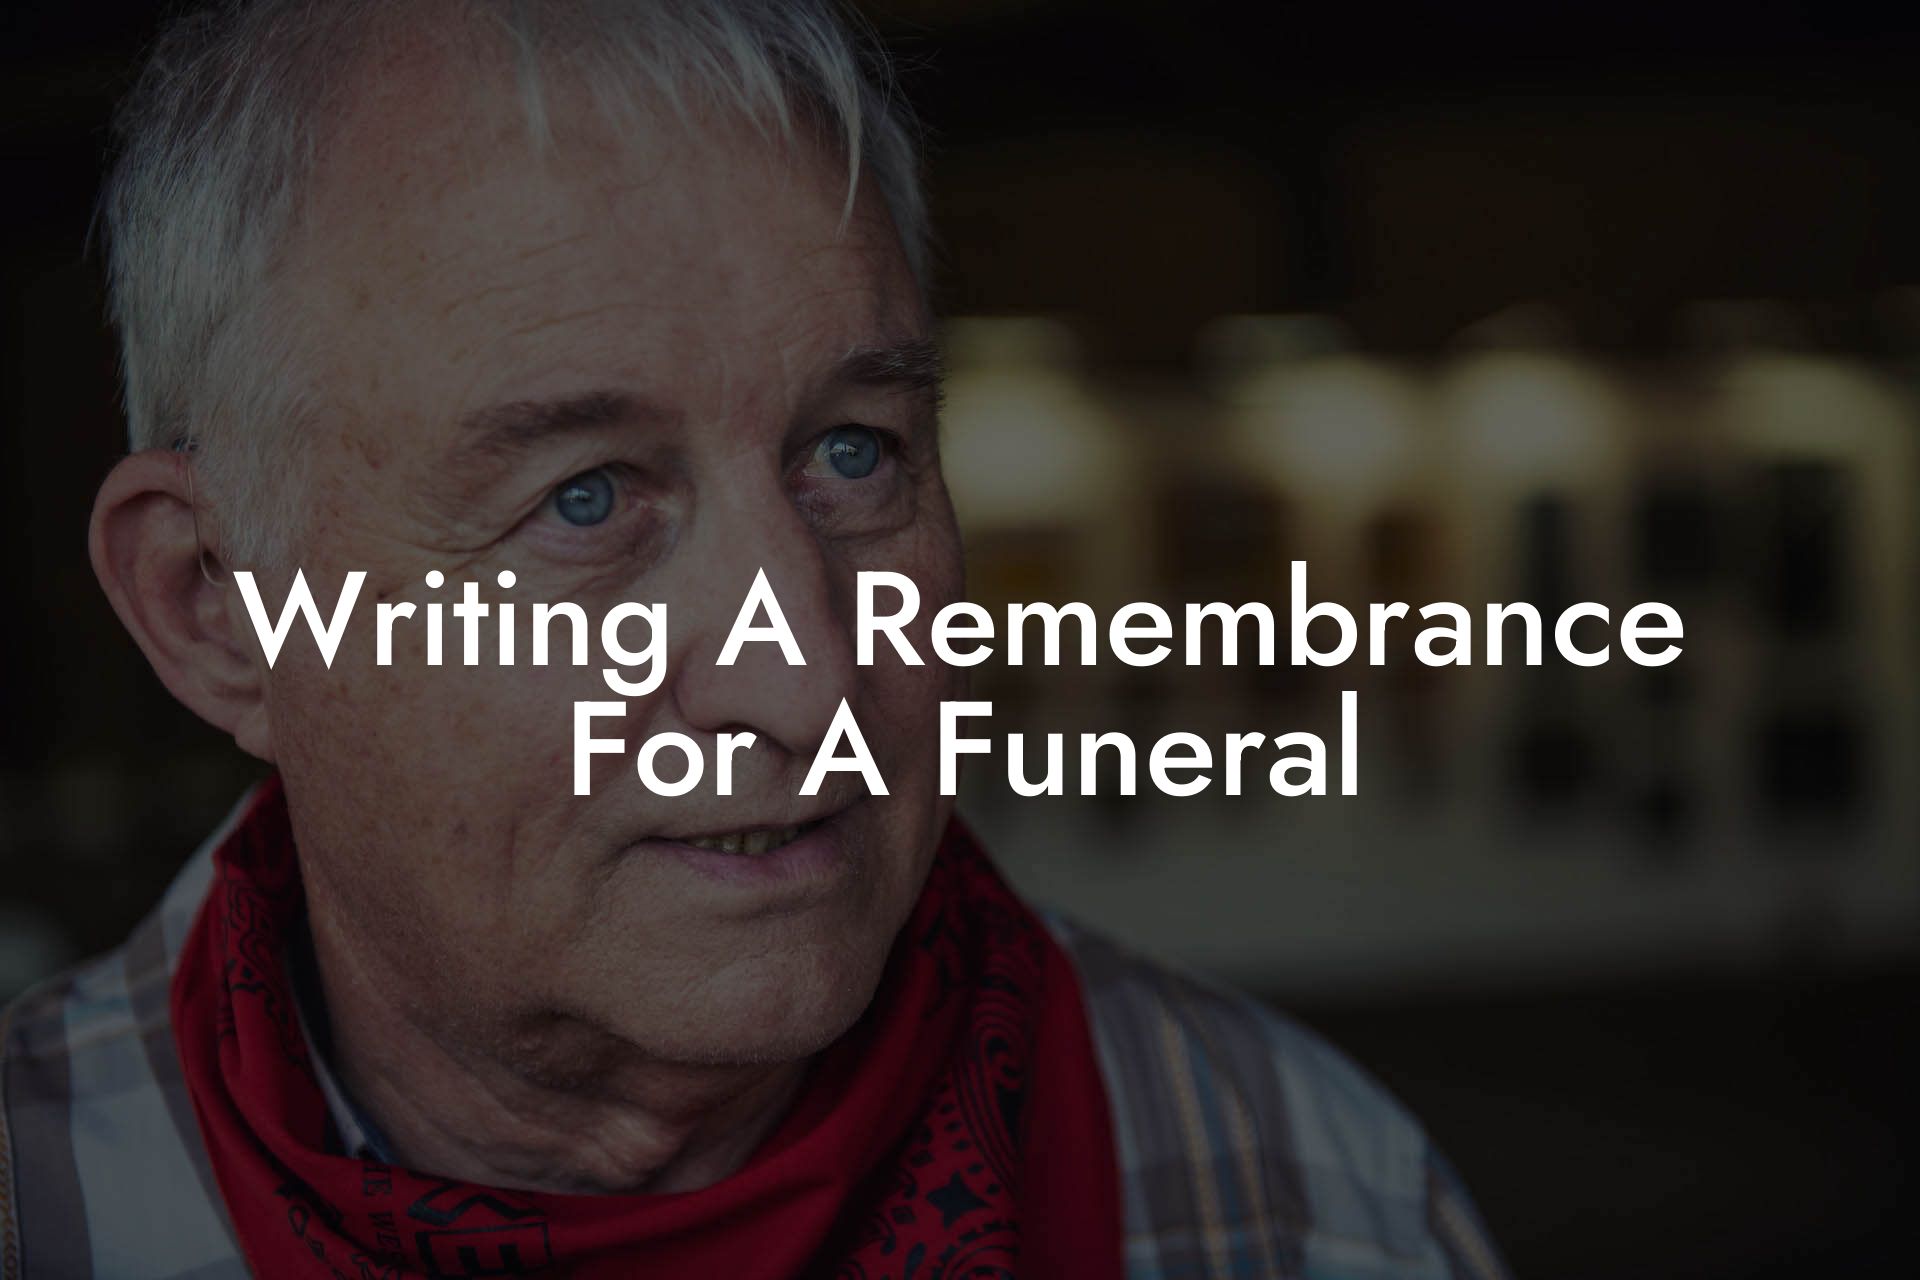 Writing A Remembrance For A Funeral